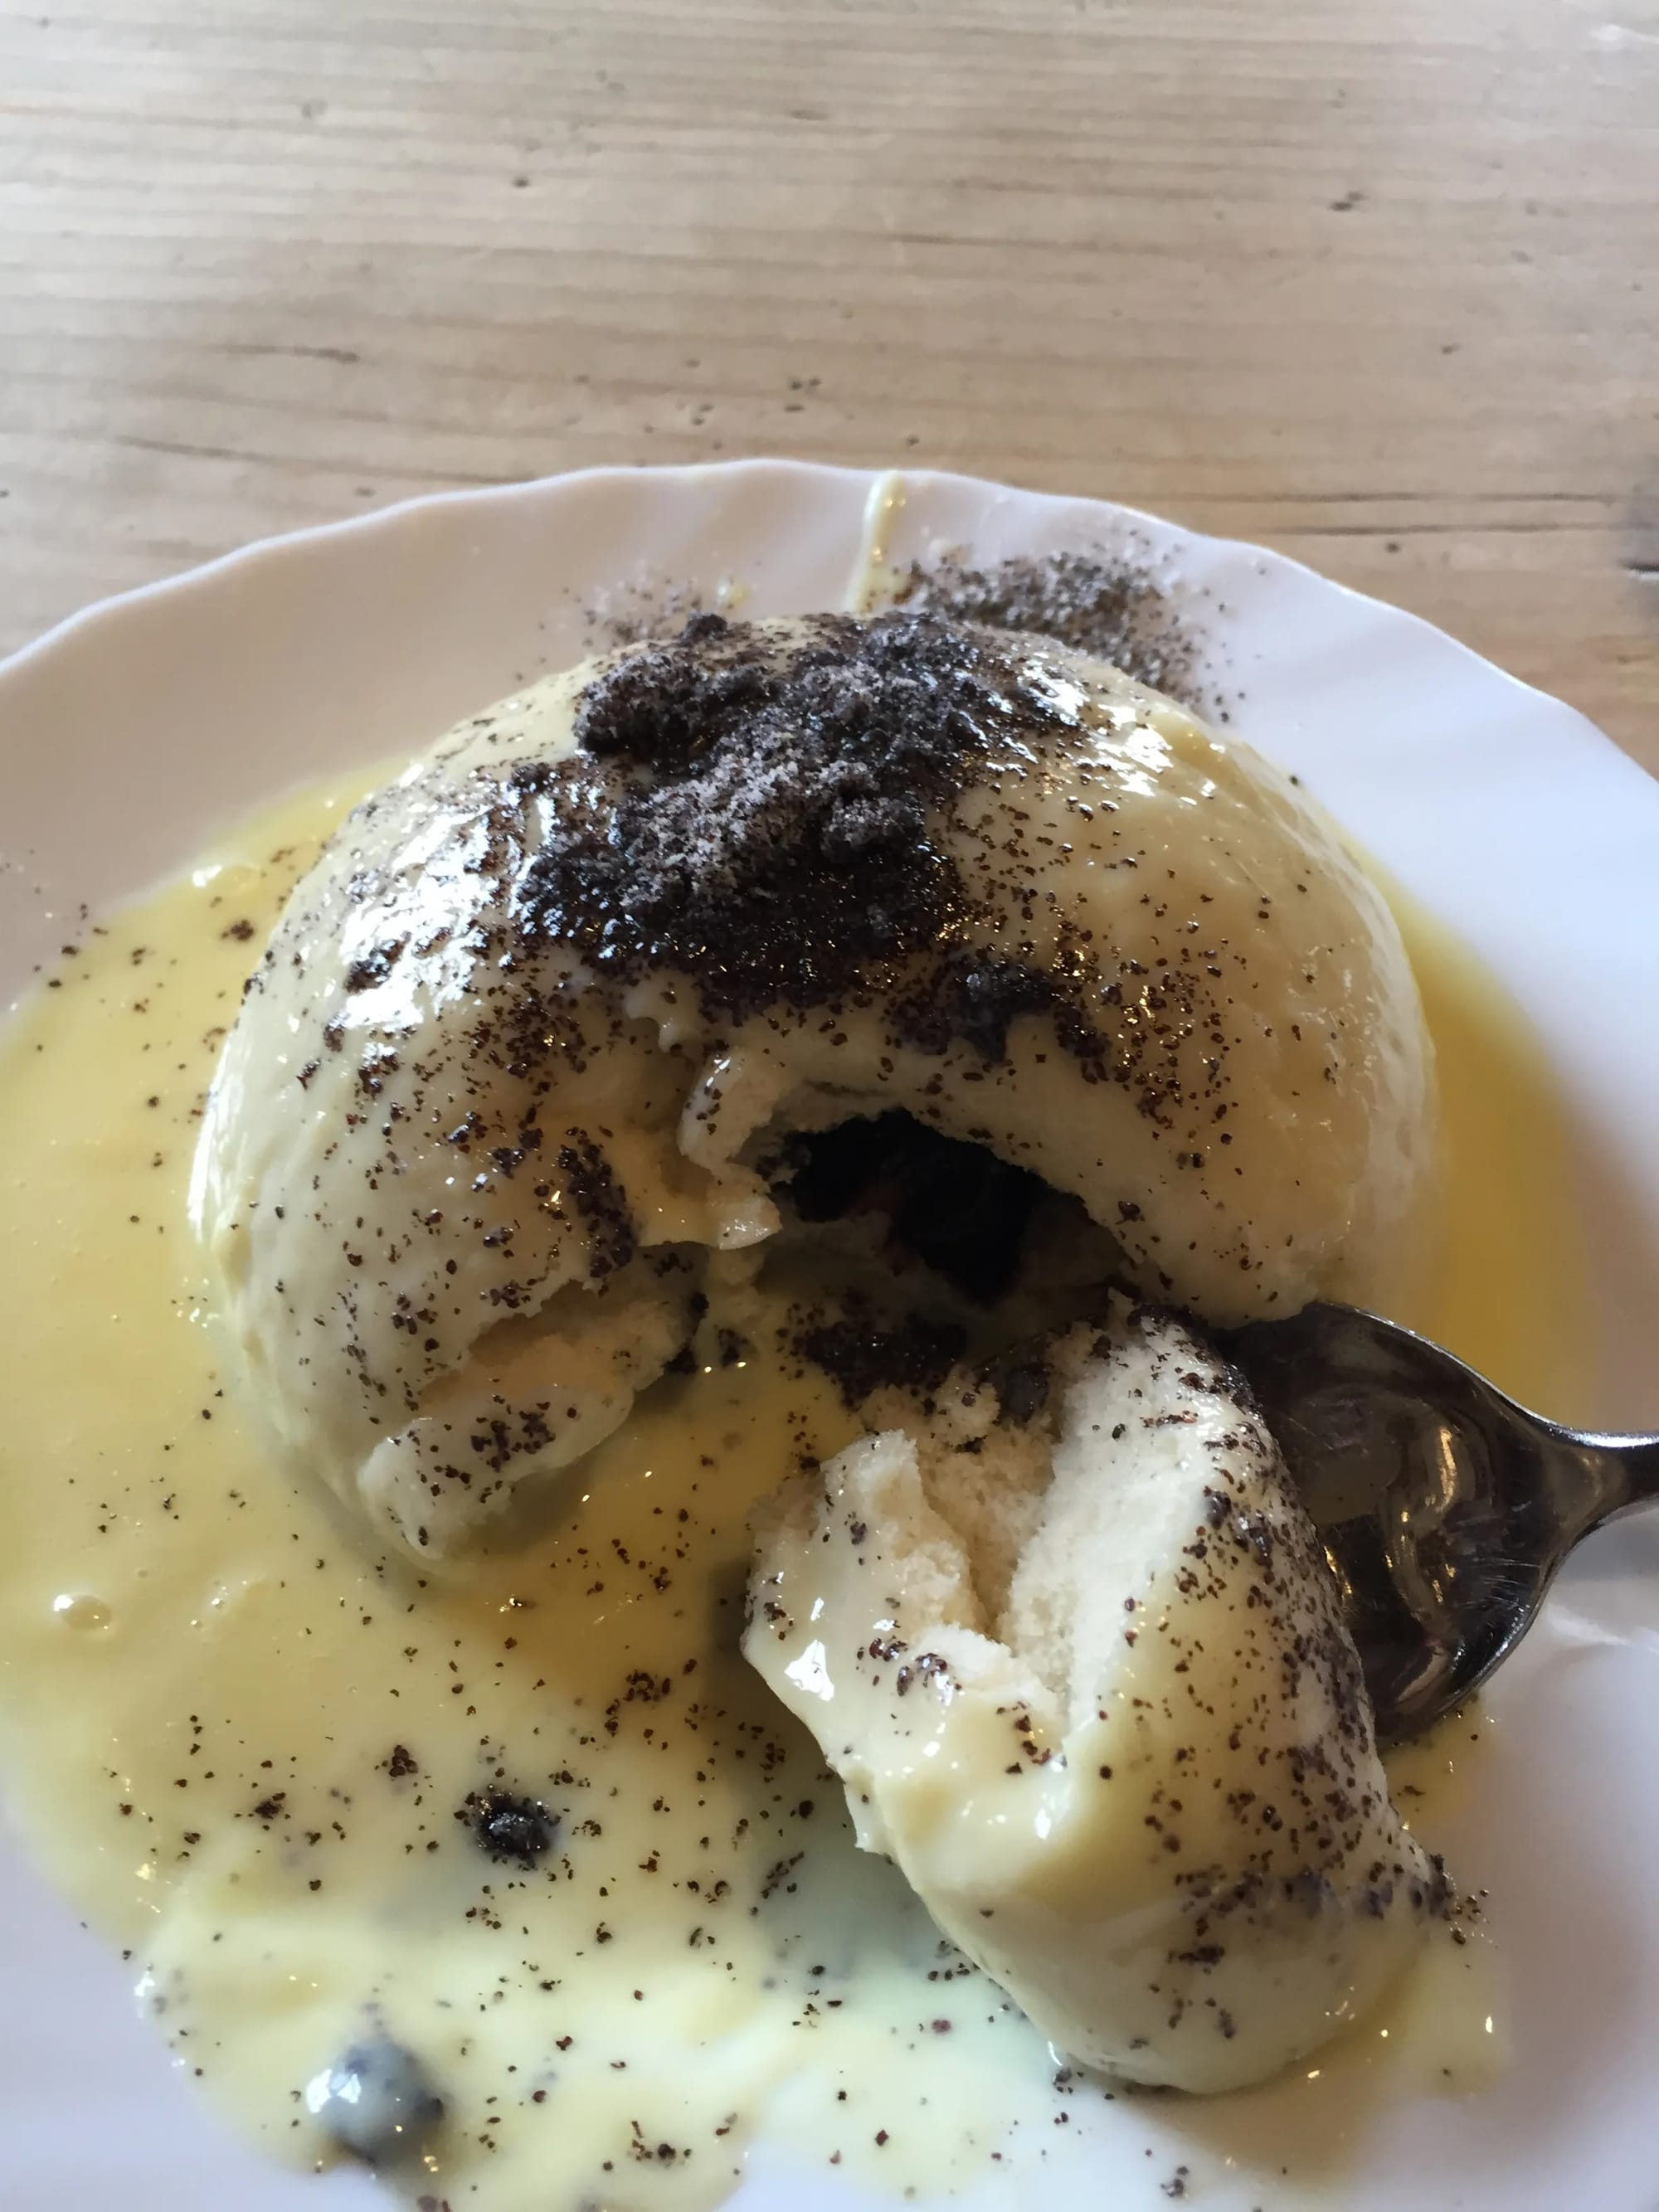 Photo by Author — lunch at Rubezahlhutte — a steamed bun with a ham filling and custard